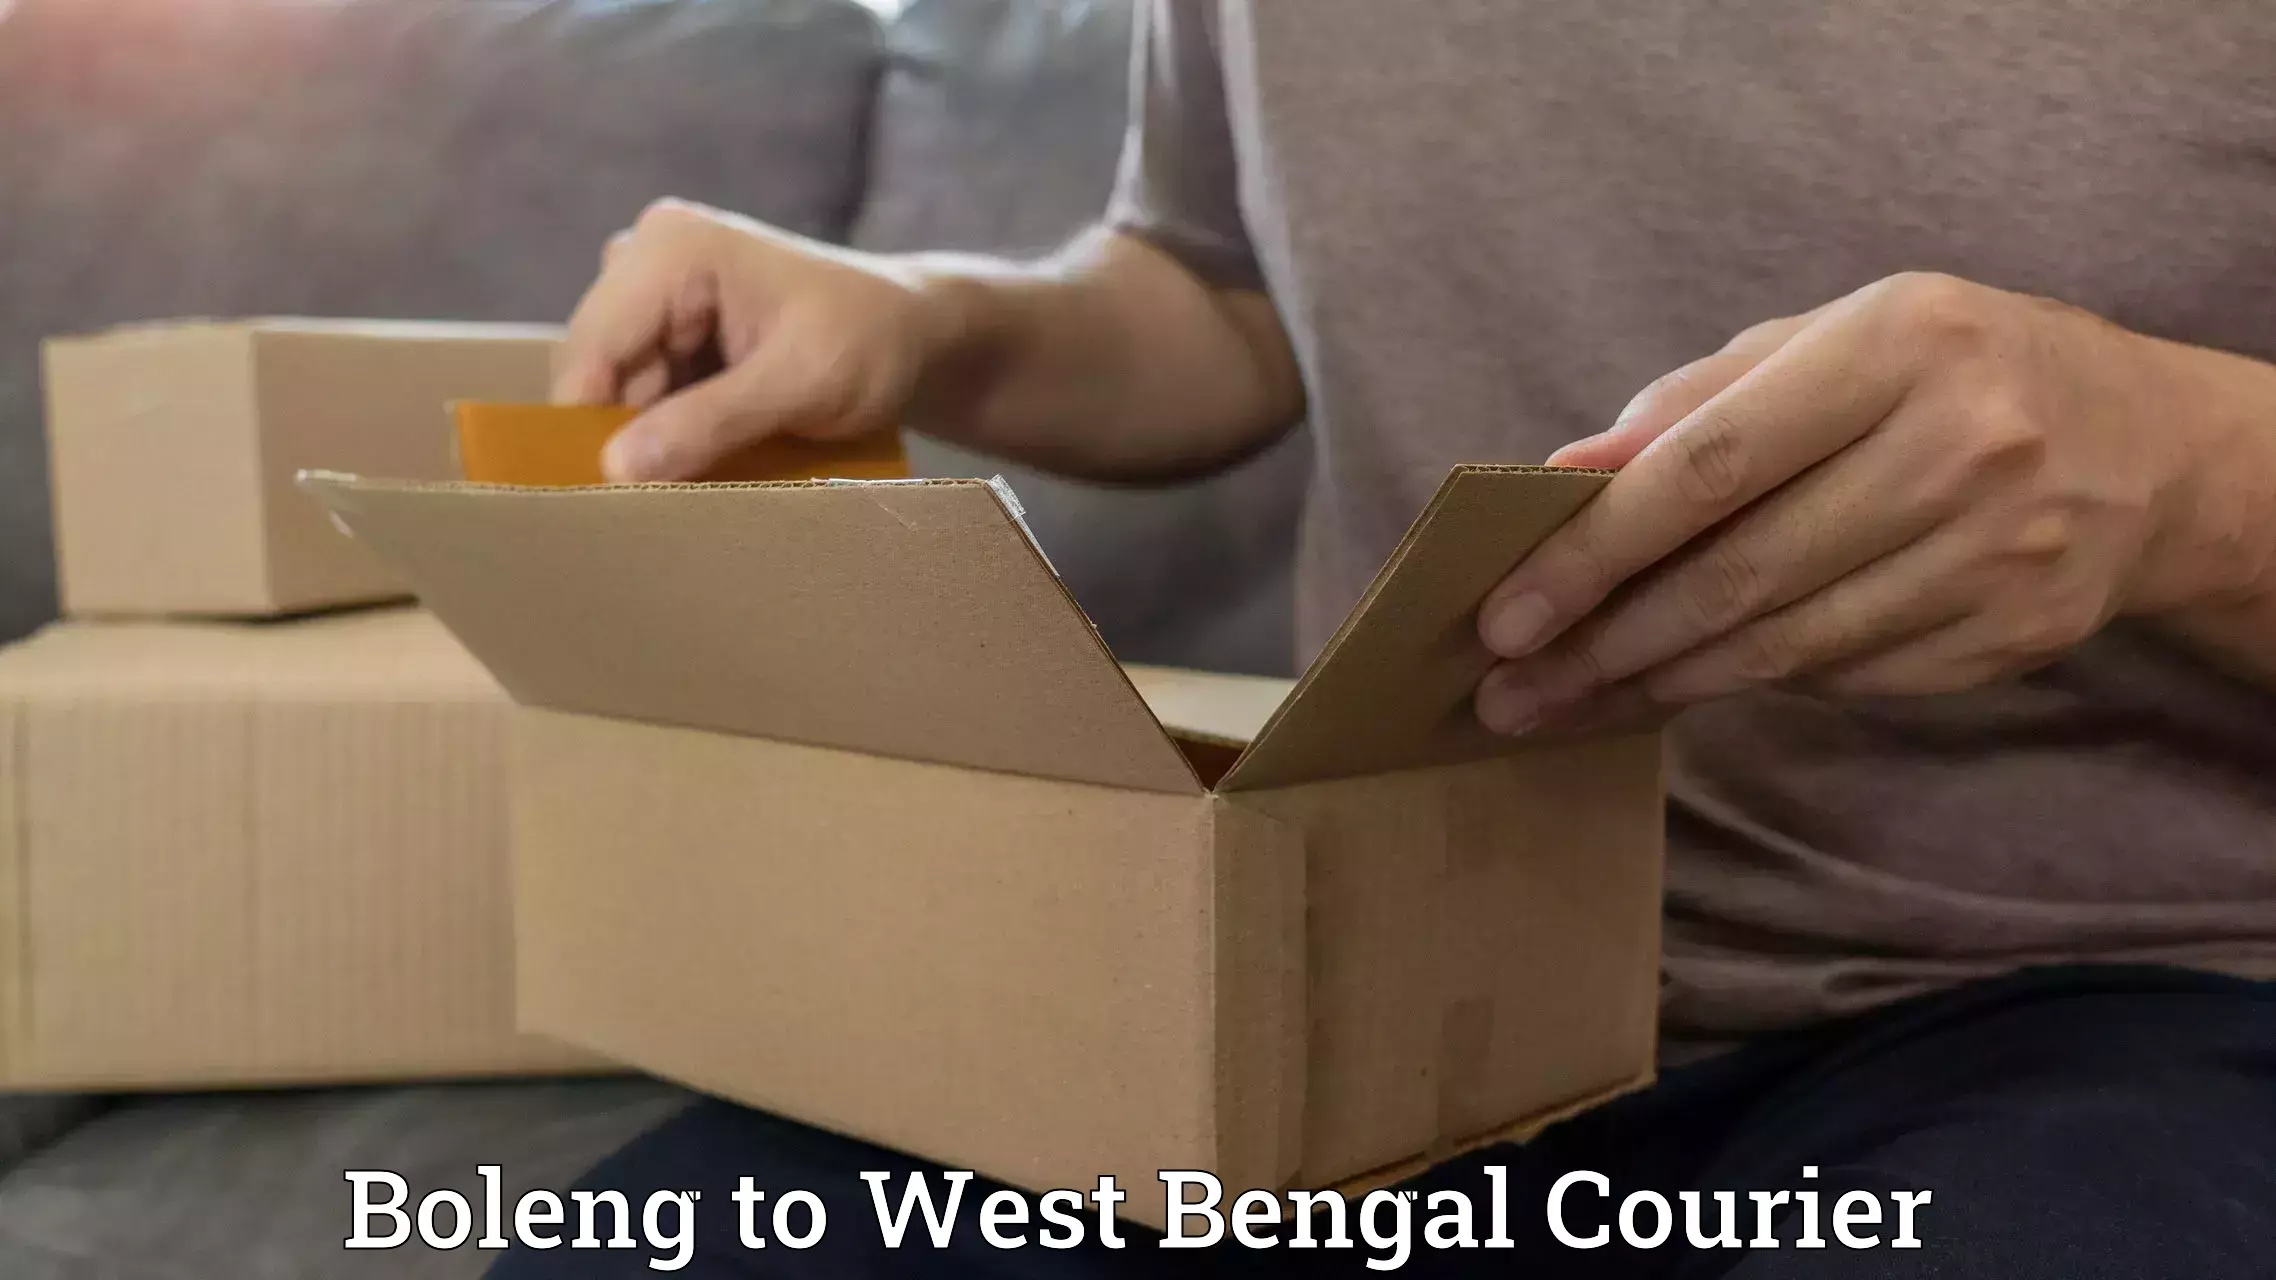 Package delivery network Boleng to Kolkata Port